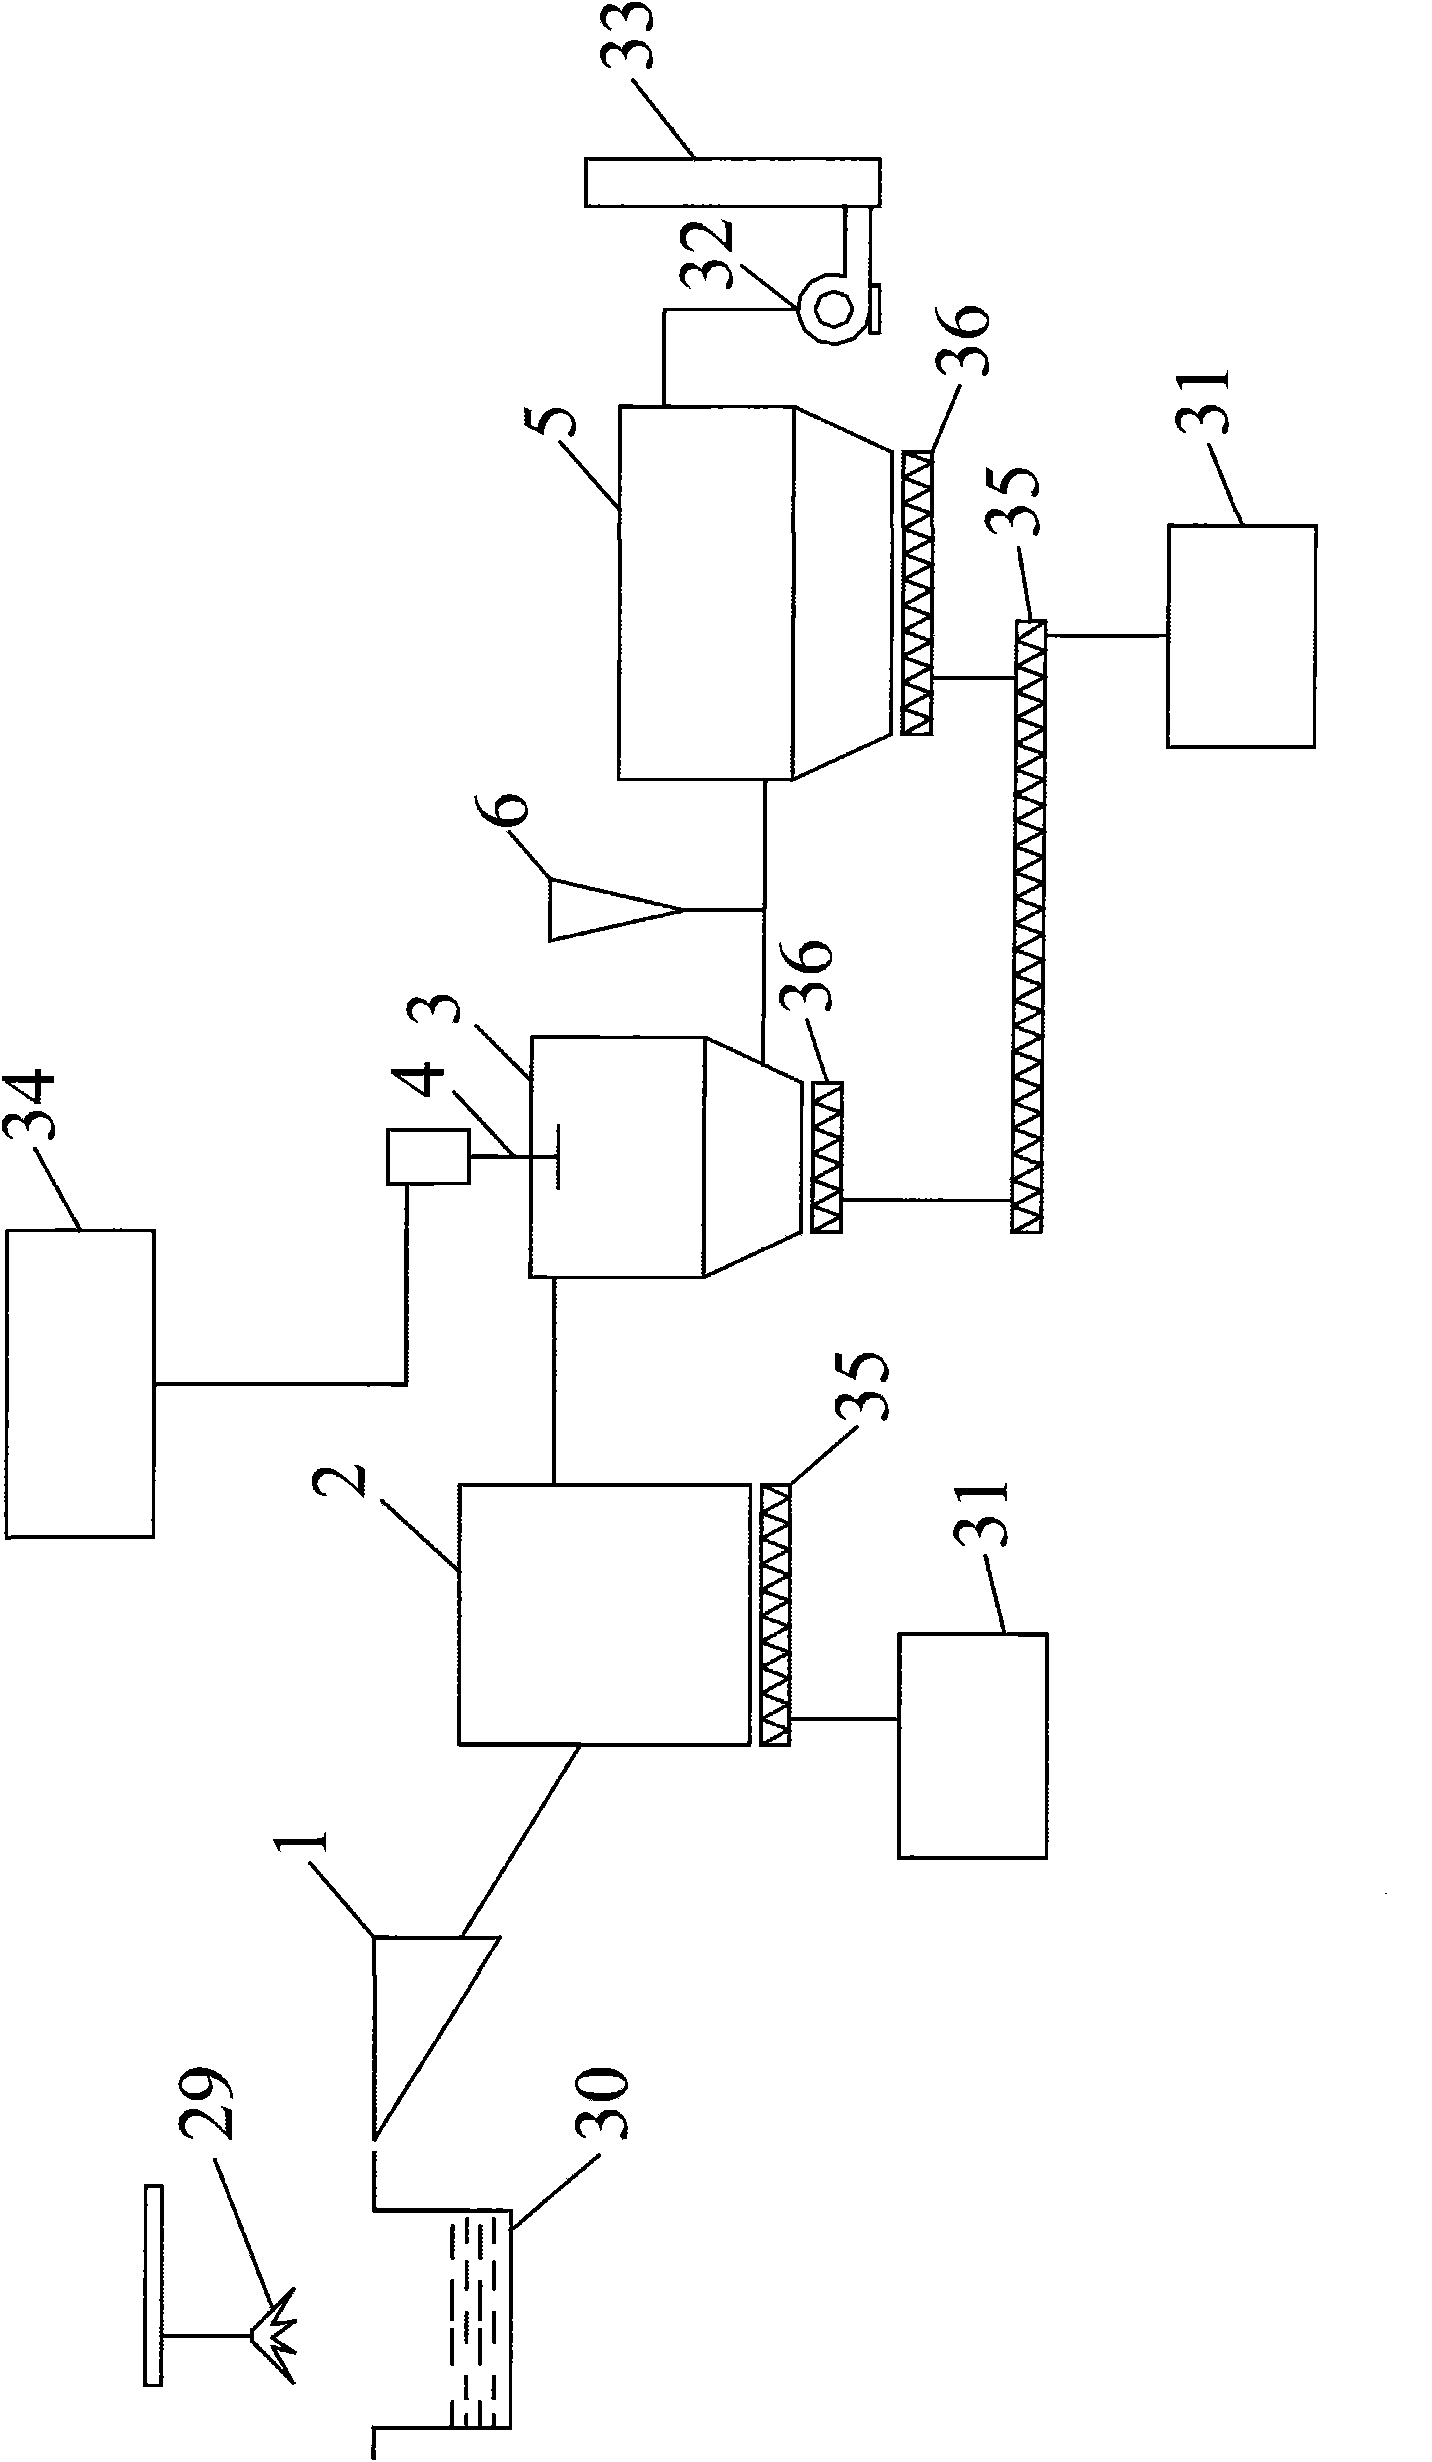 Flue gas purifying system and method